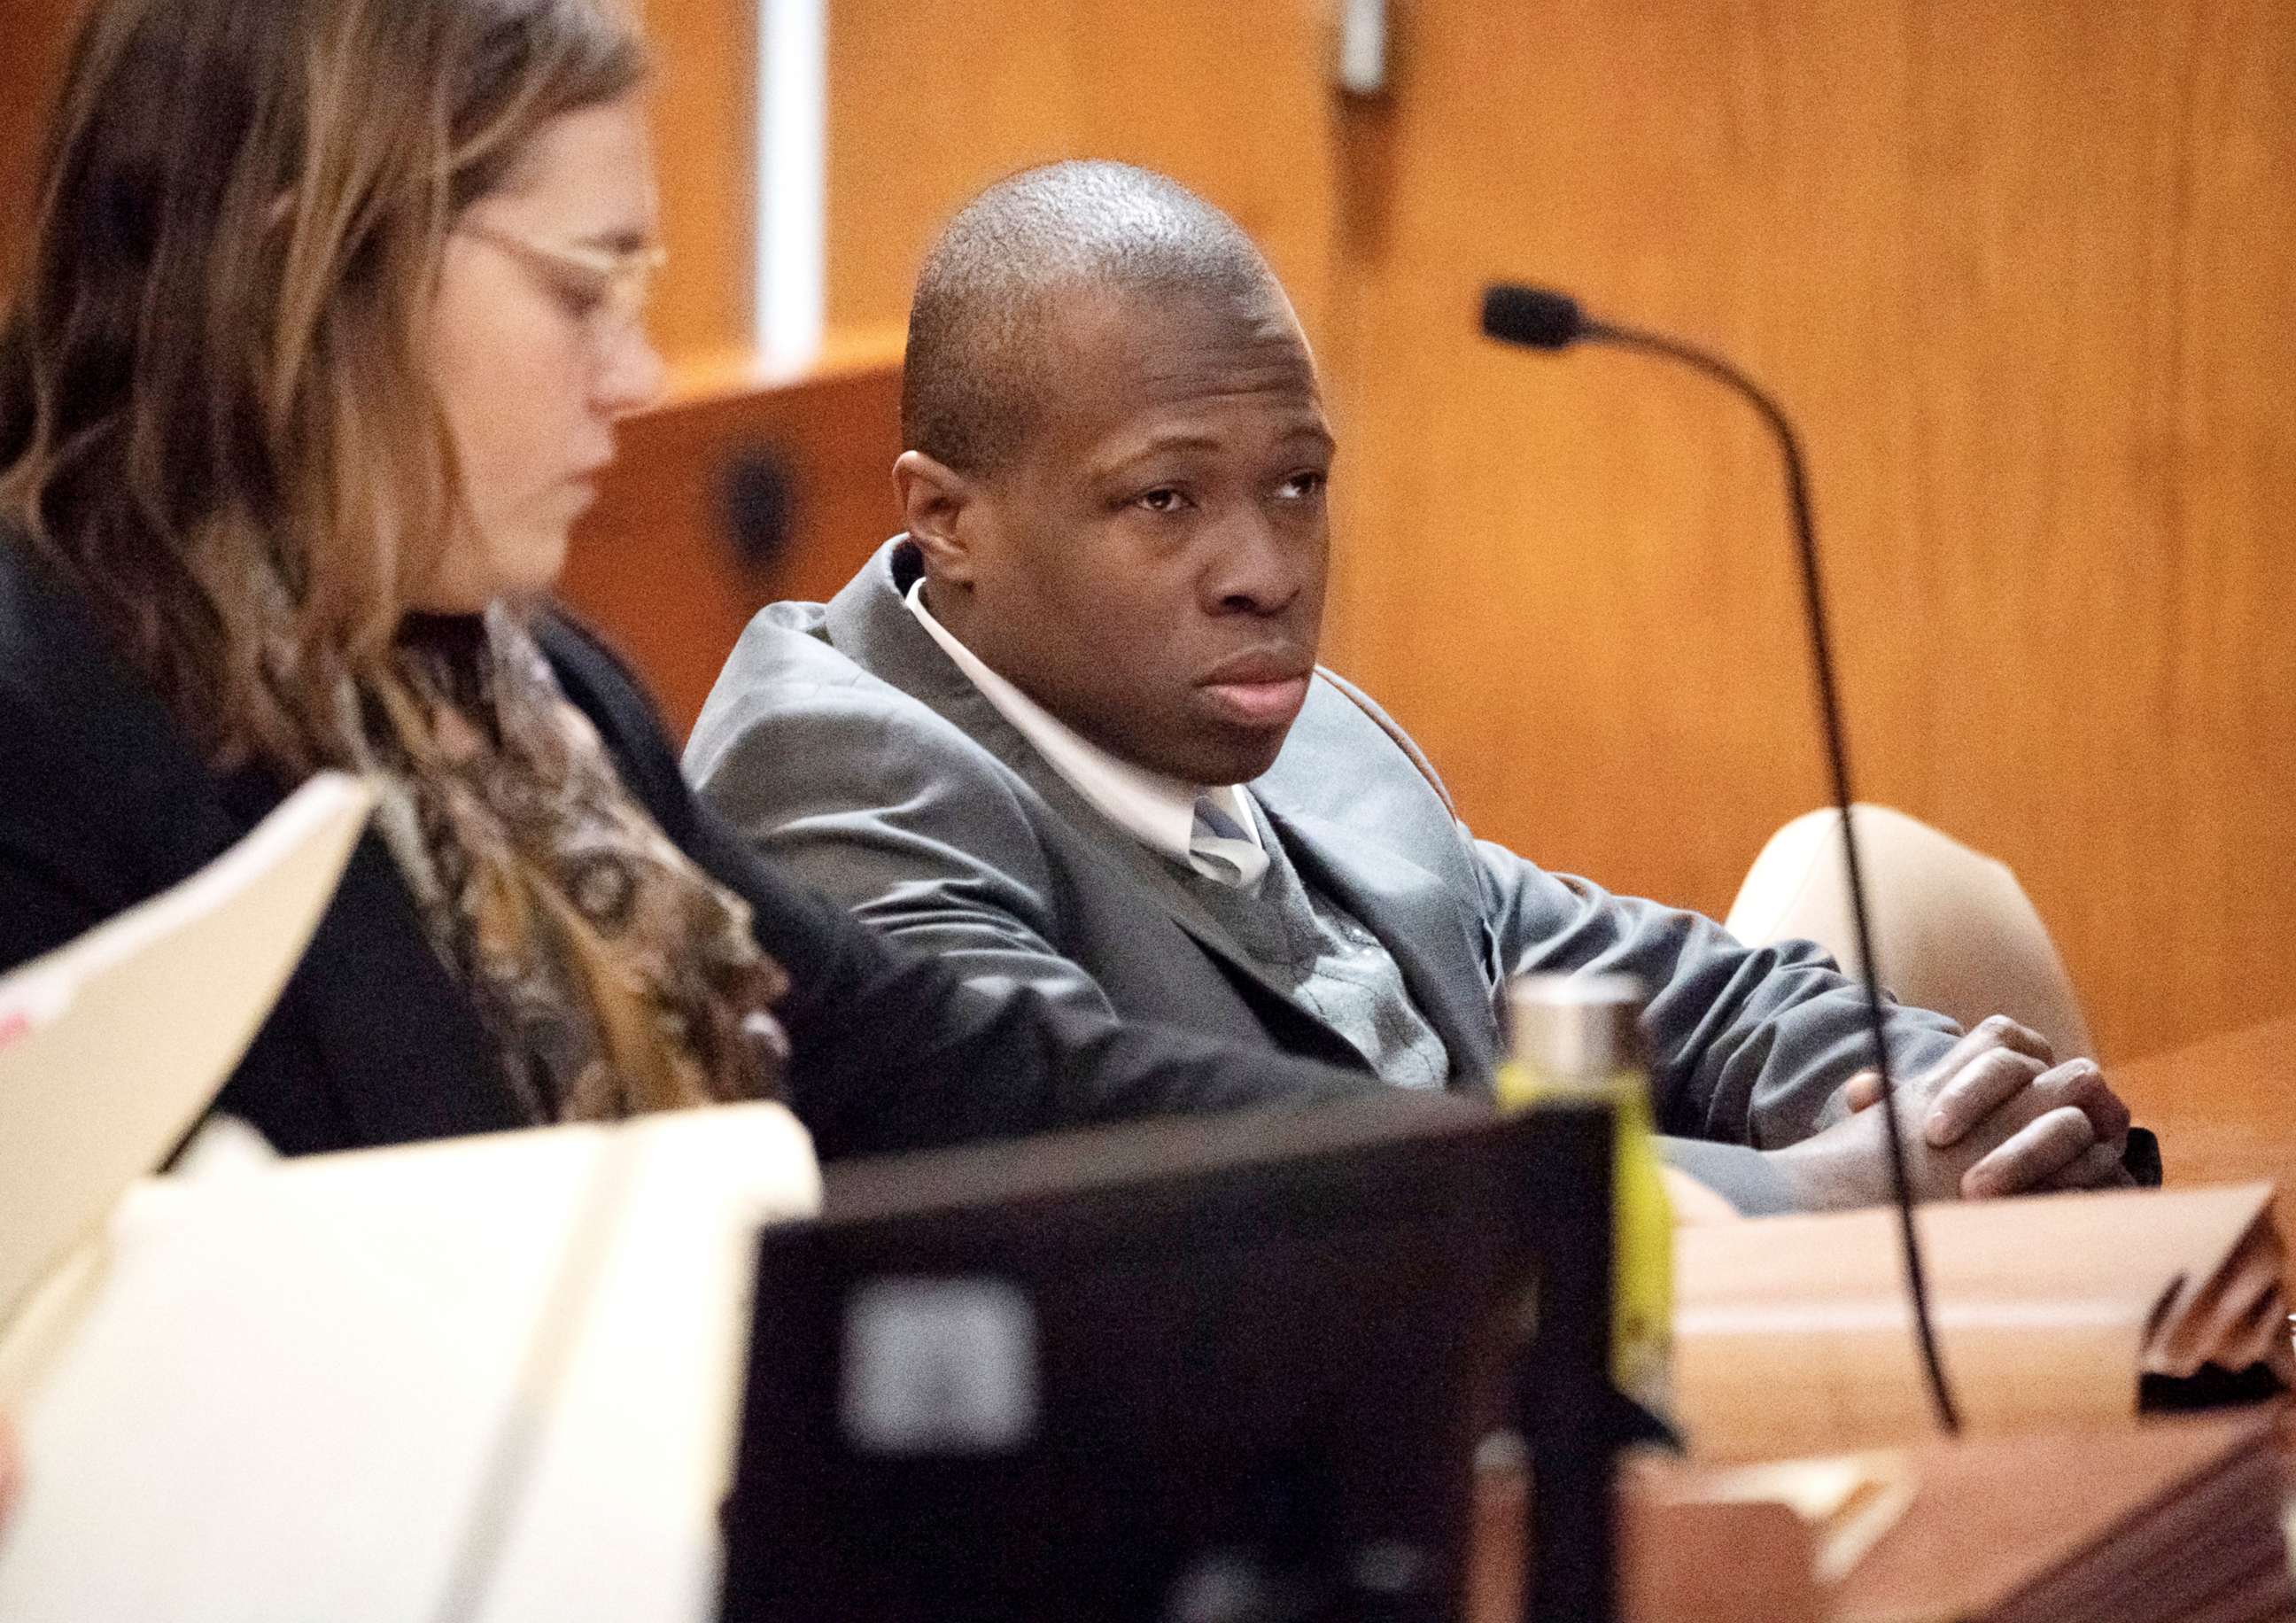 PHOTO: Defendant Chanel Lewis, right, is seated at the defense table at Supreme Court in the Queens Borough of New York, during the sixth day of his re-trial for the murder of Karina Vetrano, March 26, 2019.